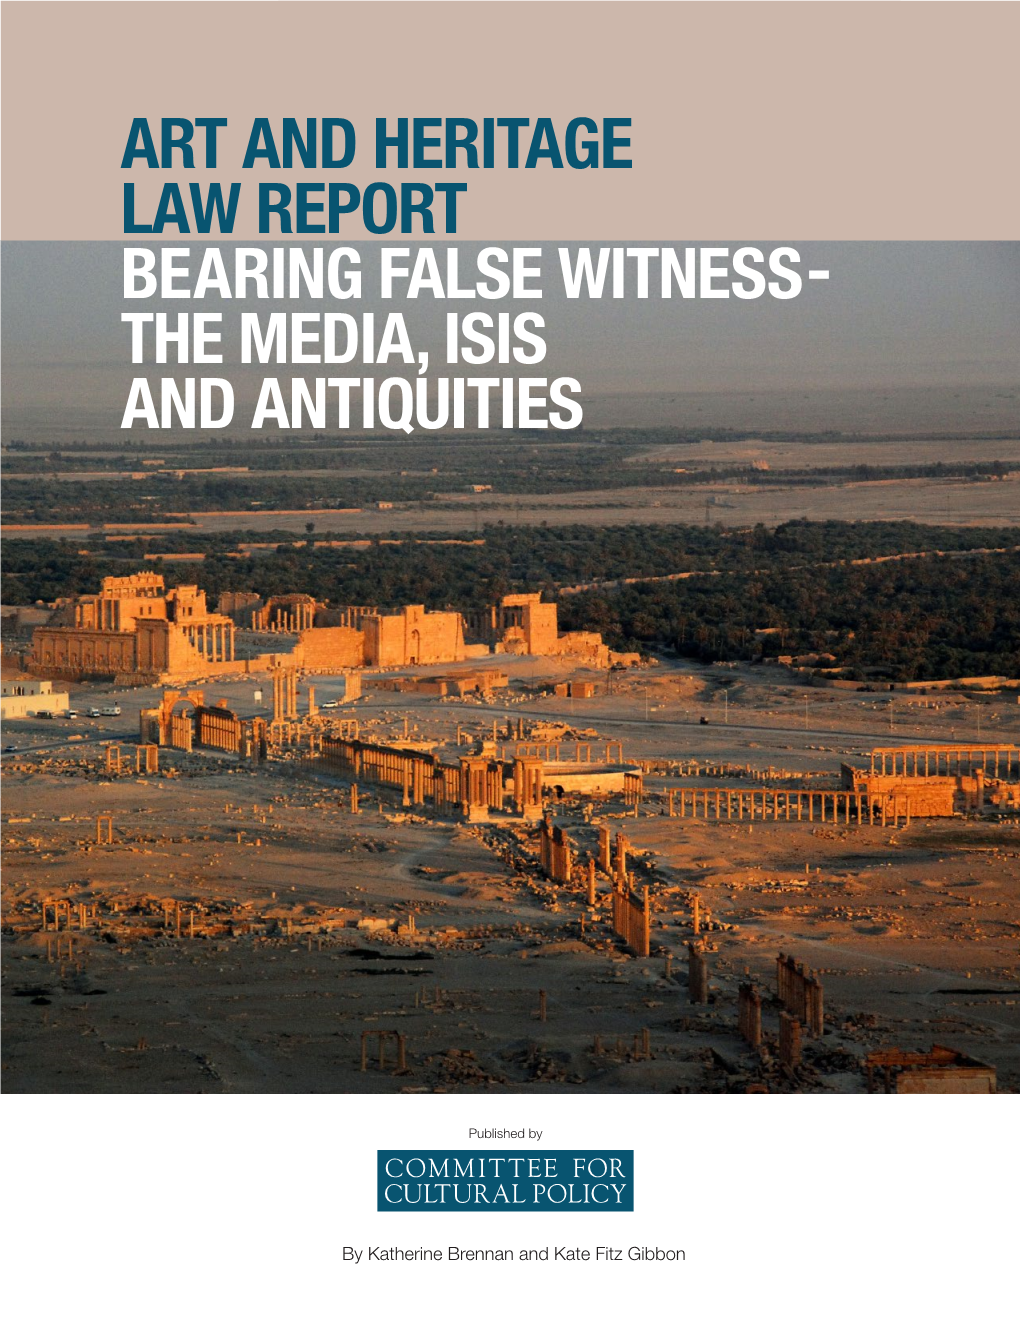 The Media, Isis and Antiquities Art and Heritage Law Report Bearing False Witness - the Media, Isis and Antiquities